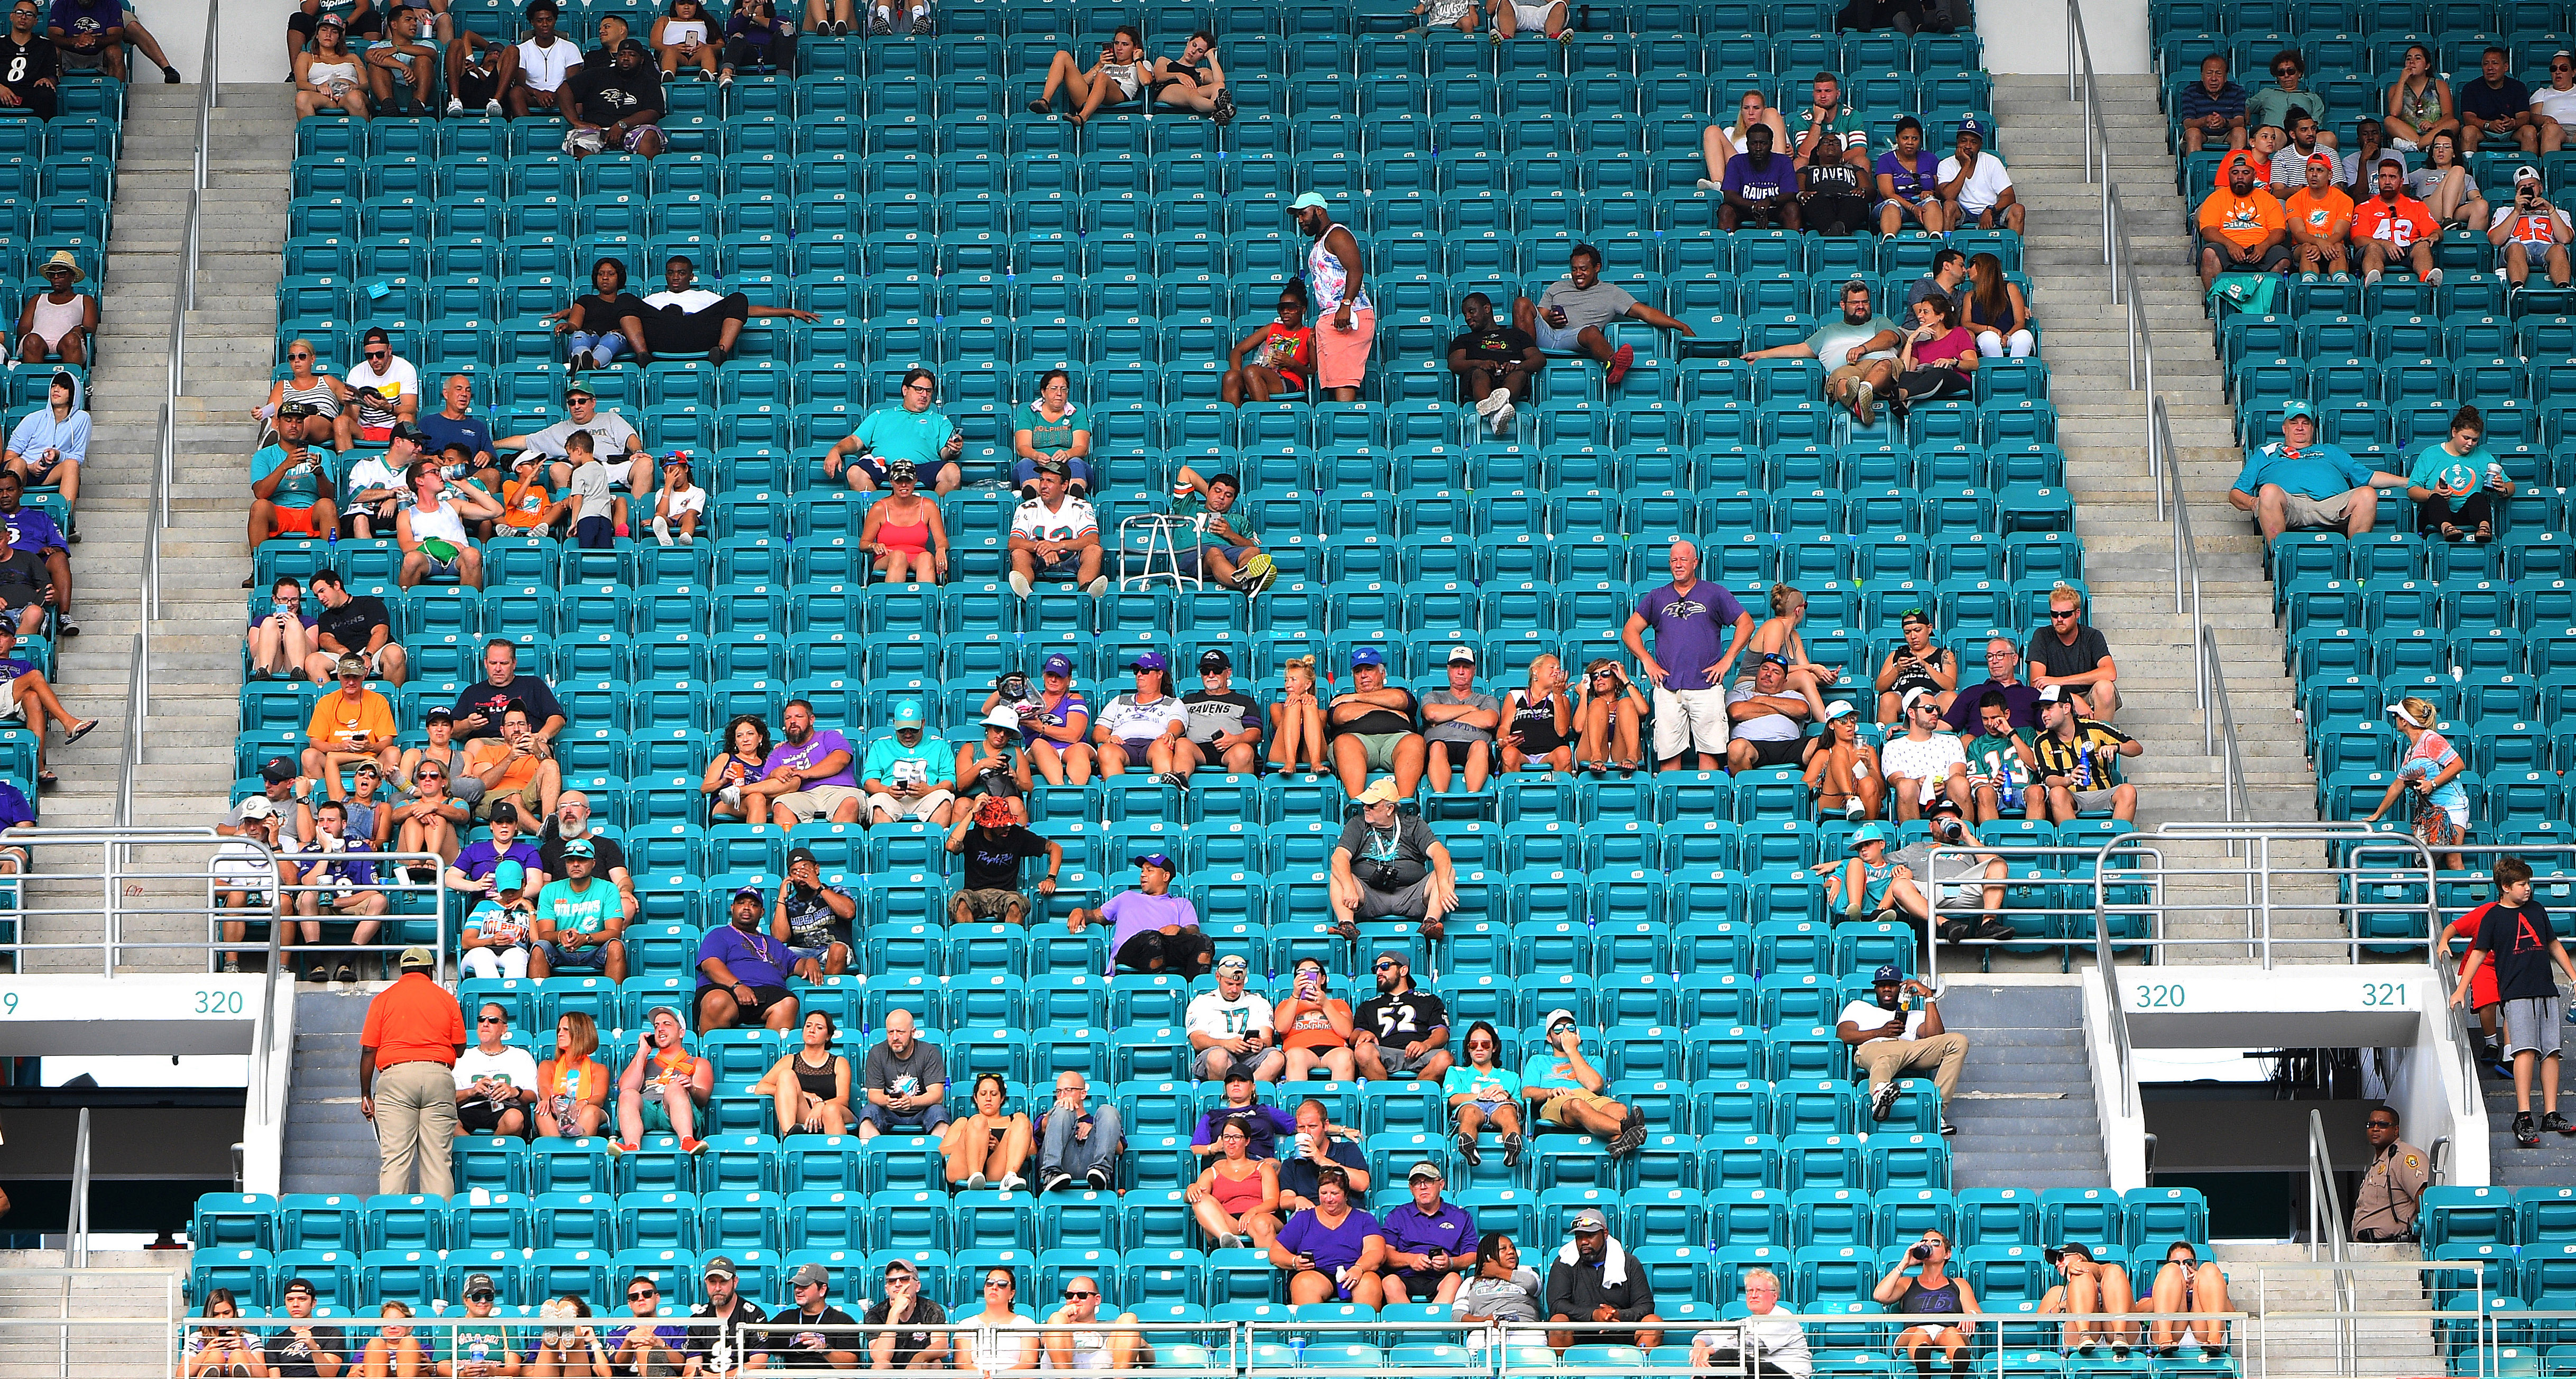 Attendance At The Dolphins Game Was So Embarrassing The Chargers Probably  Felt Sorry For Them - BroBible